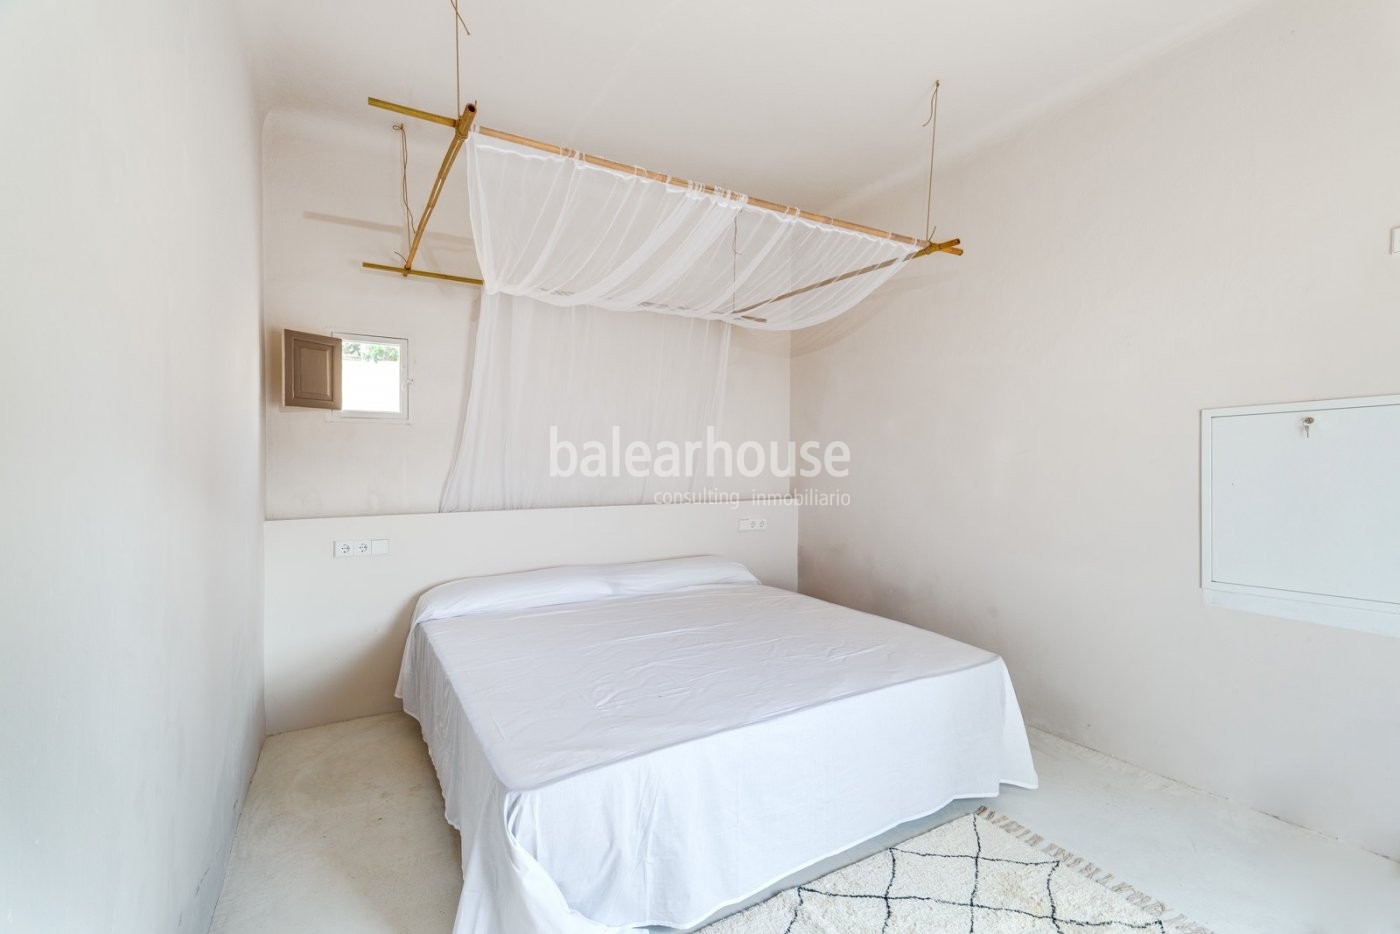 Excellent brand new house full of light and charm very close to the beaches and port of Cala Ratjada